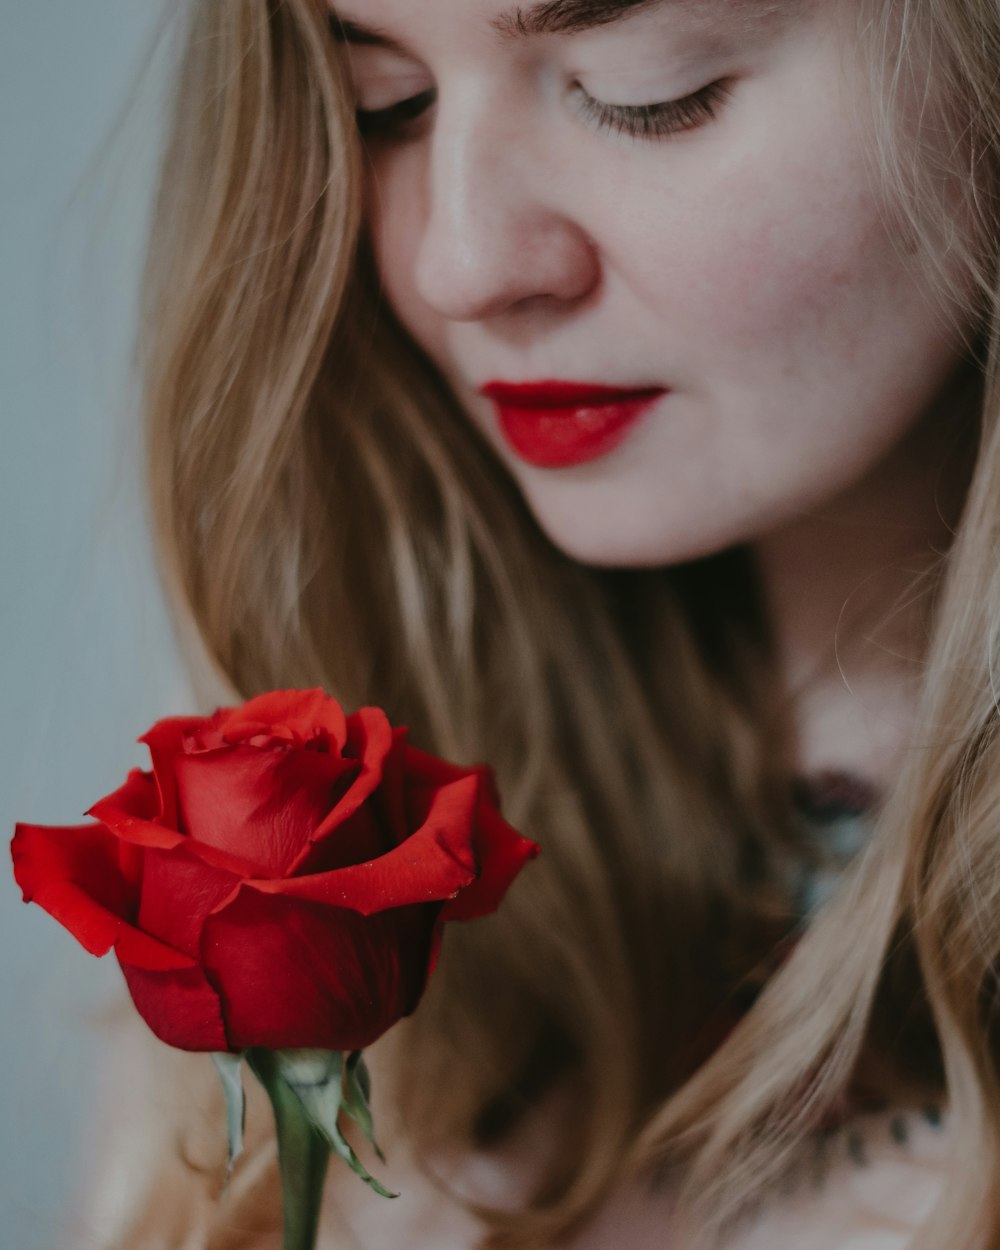 1000 Girl With Flowers Pictures Download Free Images On Unsplash